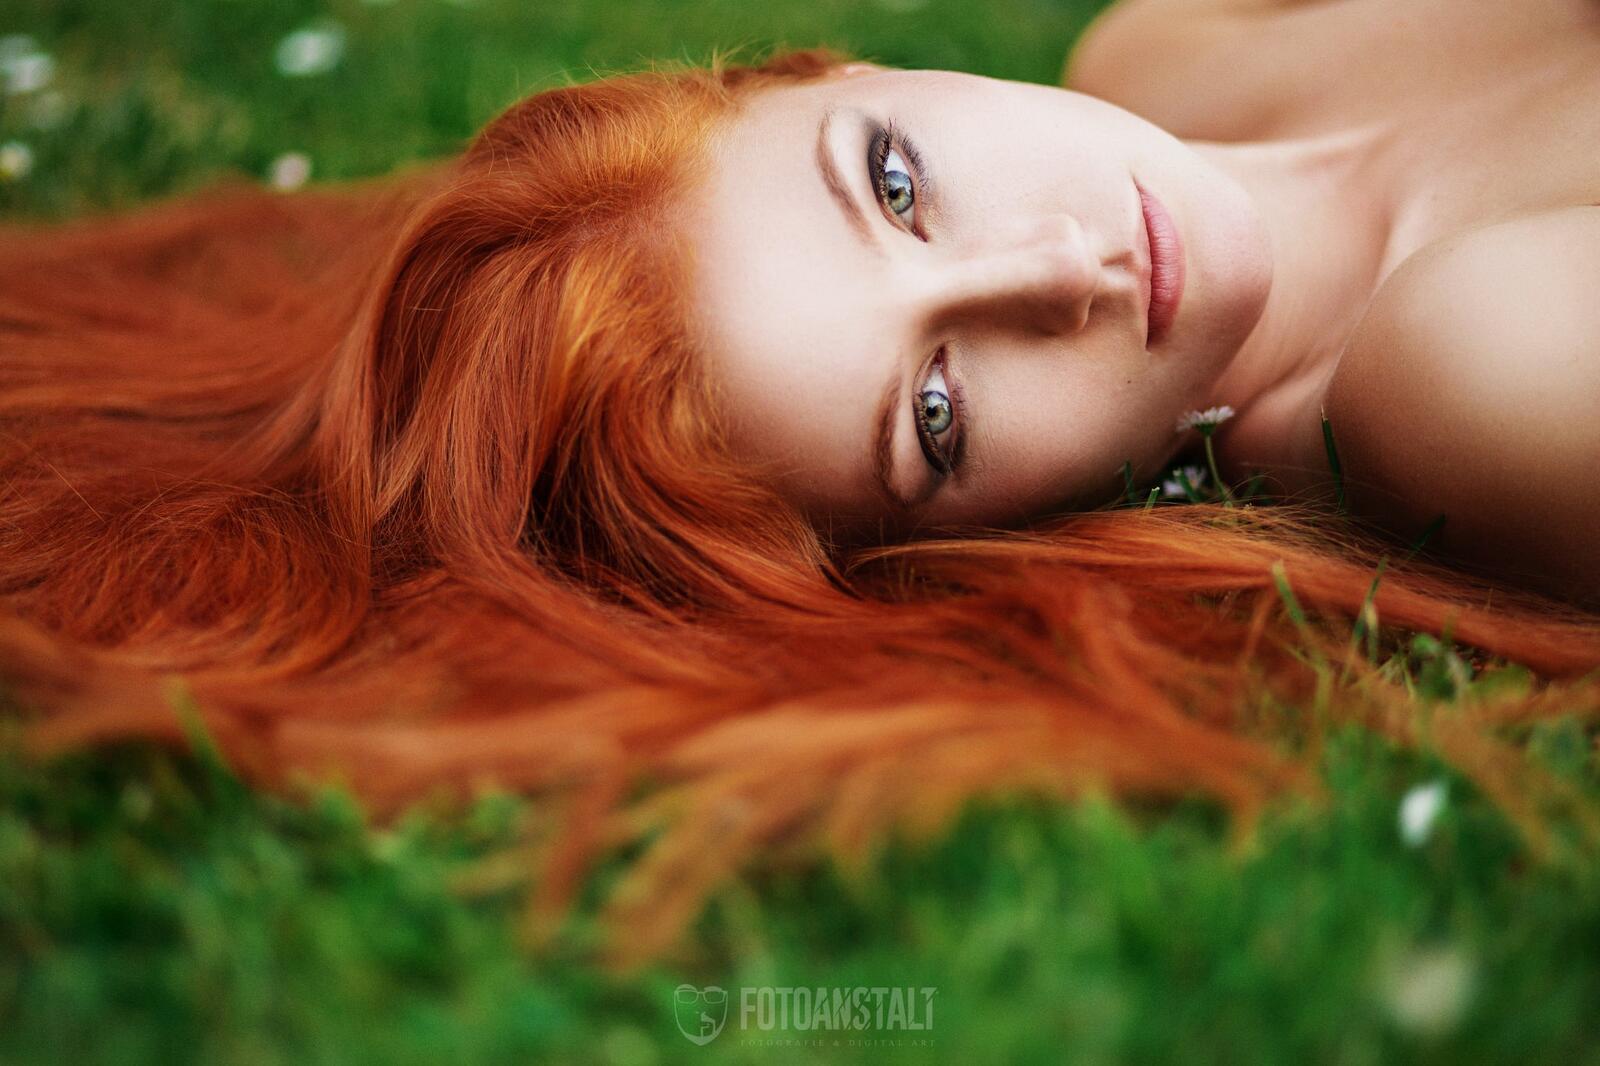 Wallpapers face woman redhead on the desktop